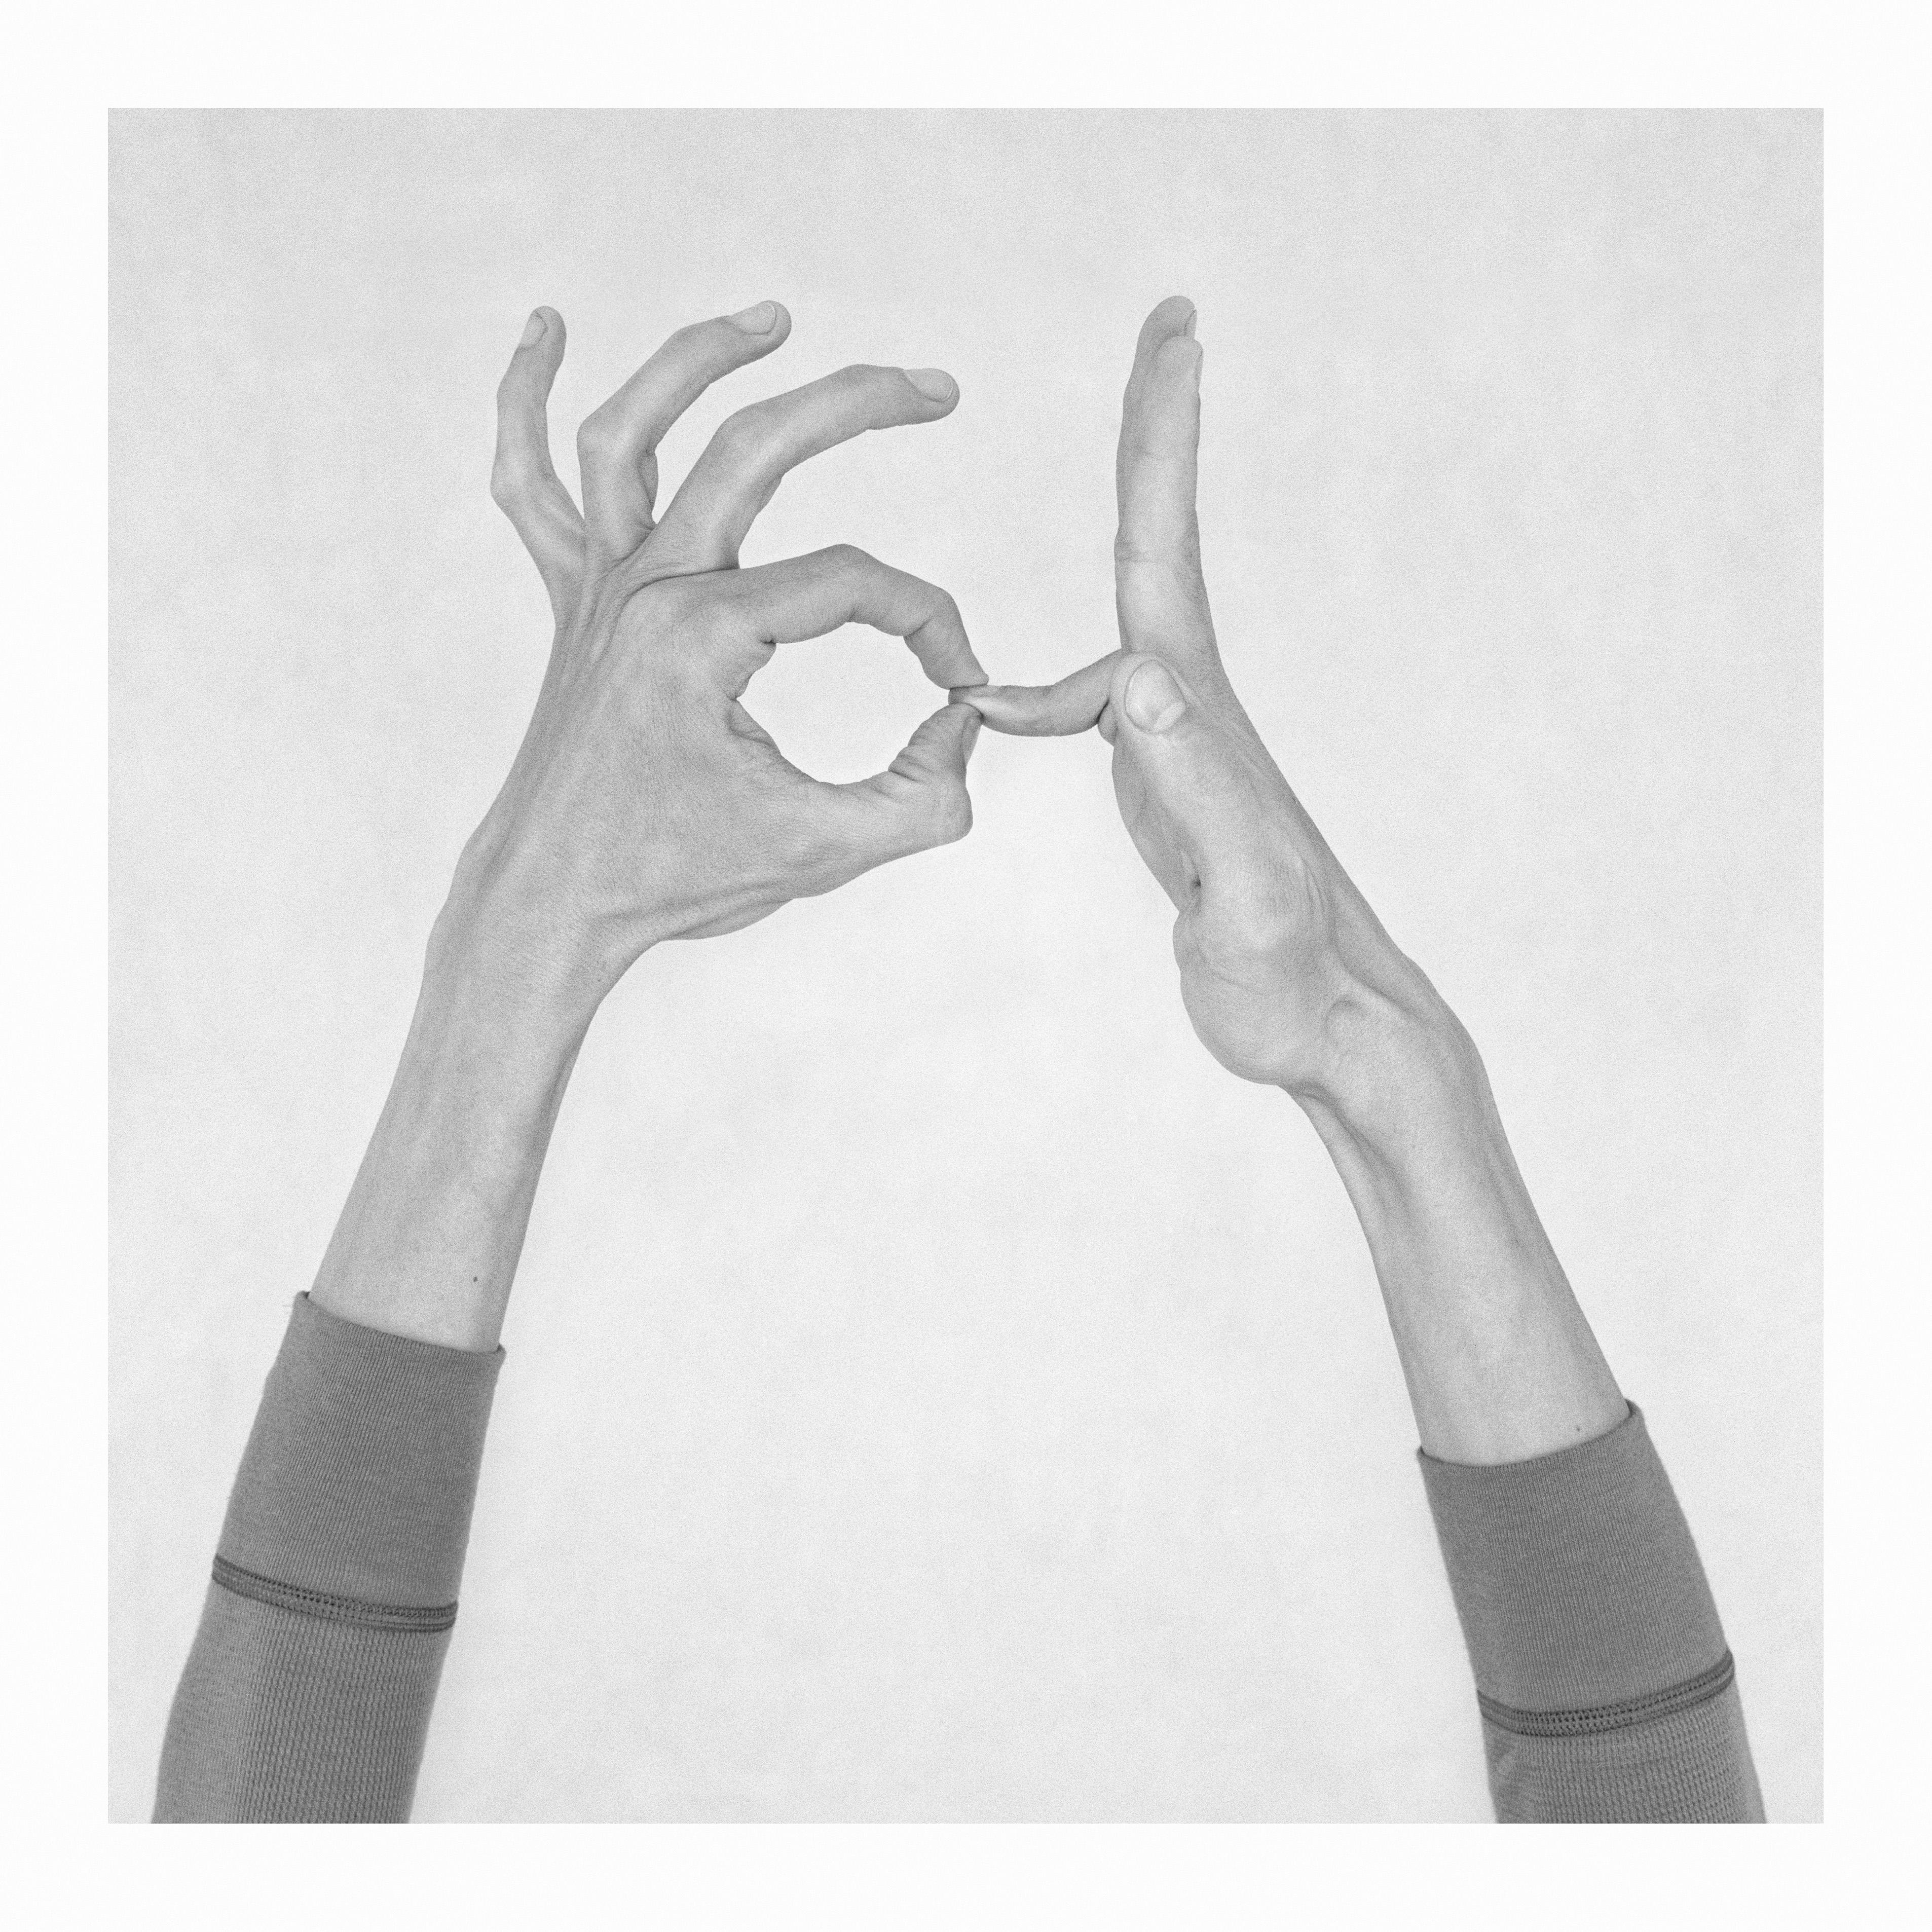 Nico Baixas / Gos-com-fuig Figurative Photograph - Untitled XXI. From the Series Chiromorphose. Hands. Black & White Photography